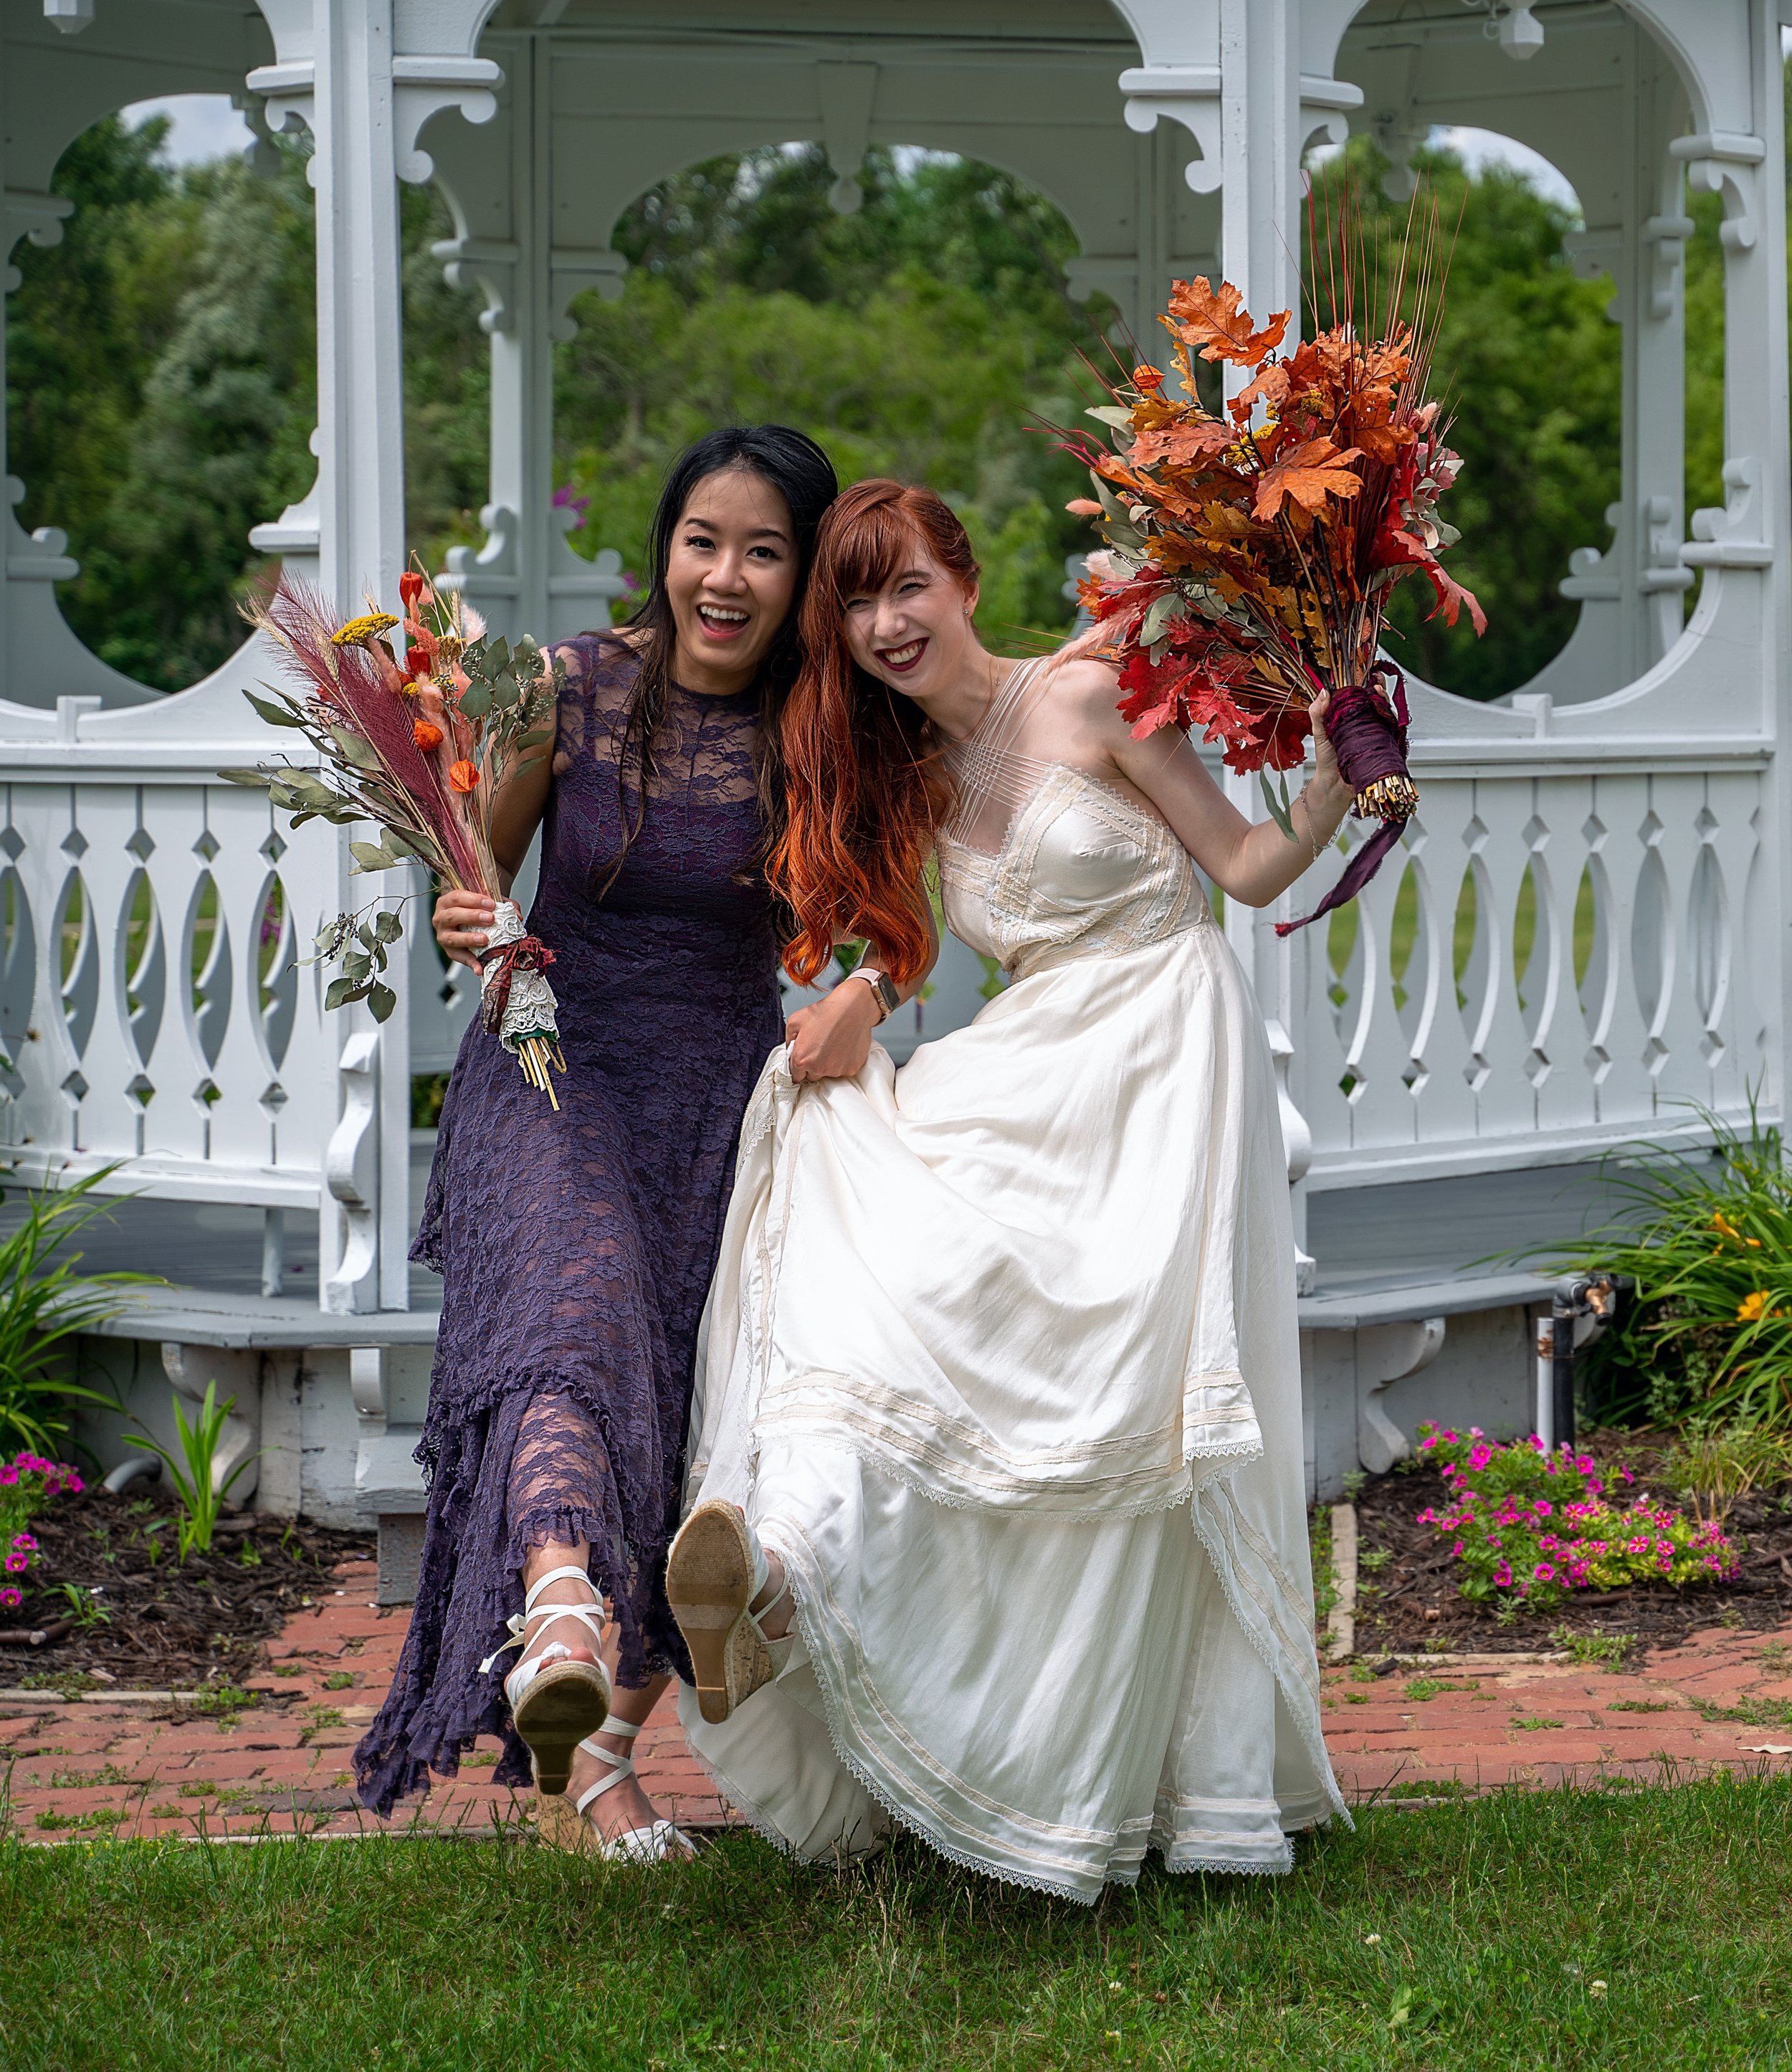 Bride and Made of Honor fun wedding Photo